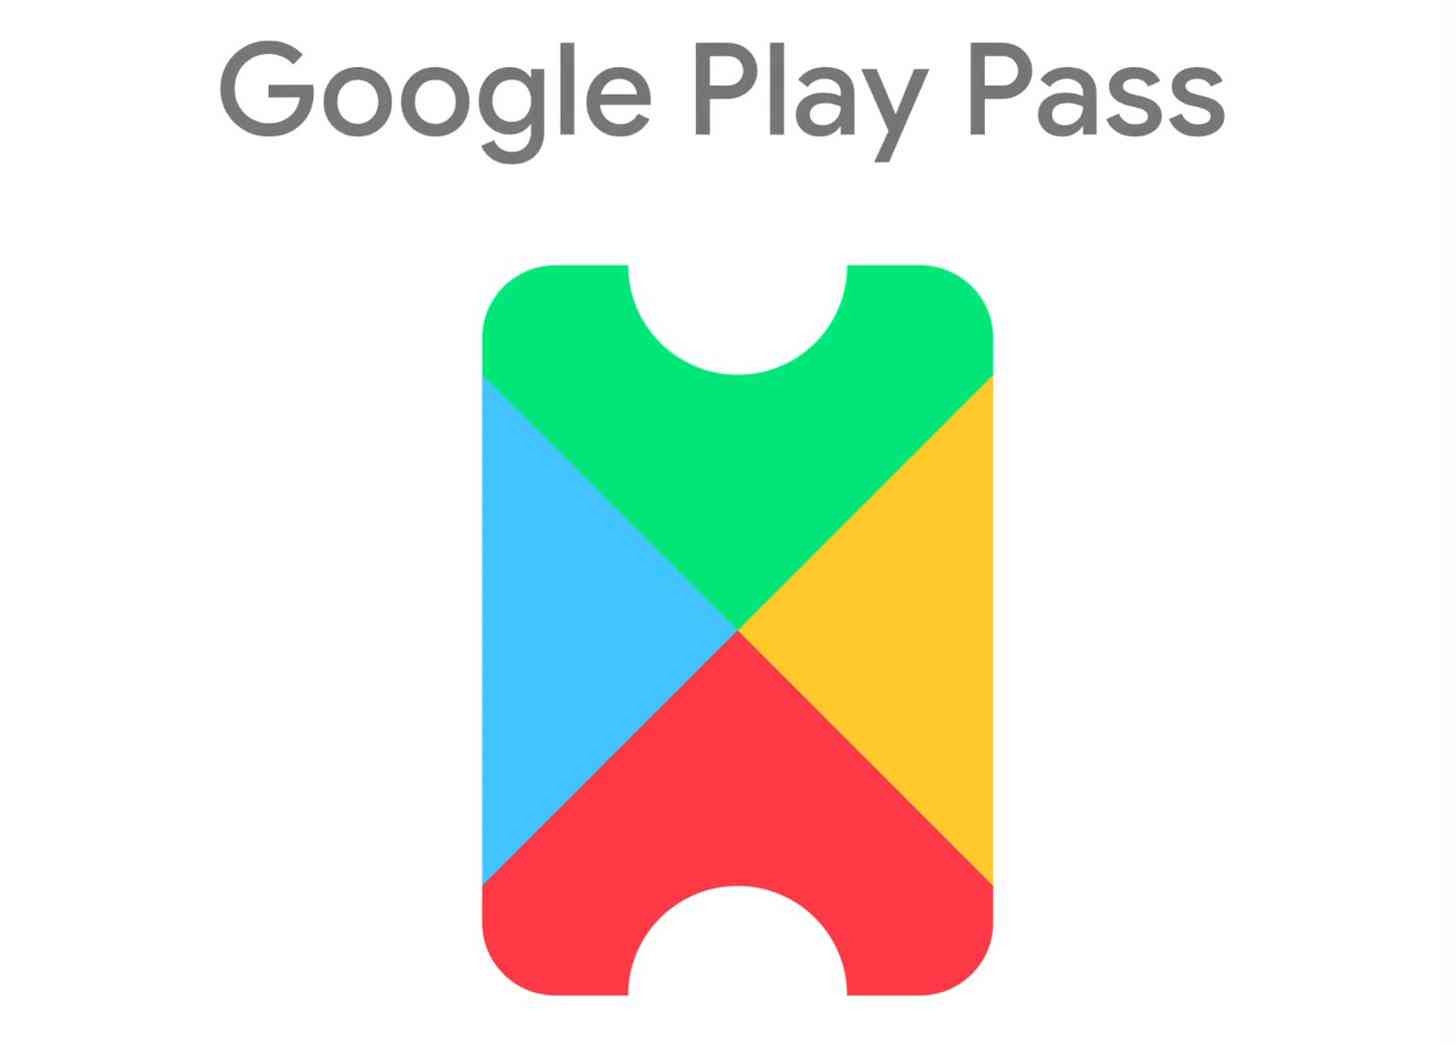 Google Play Pass launches 30 annual subscription, expands to 9 new